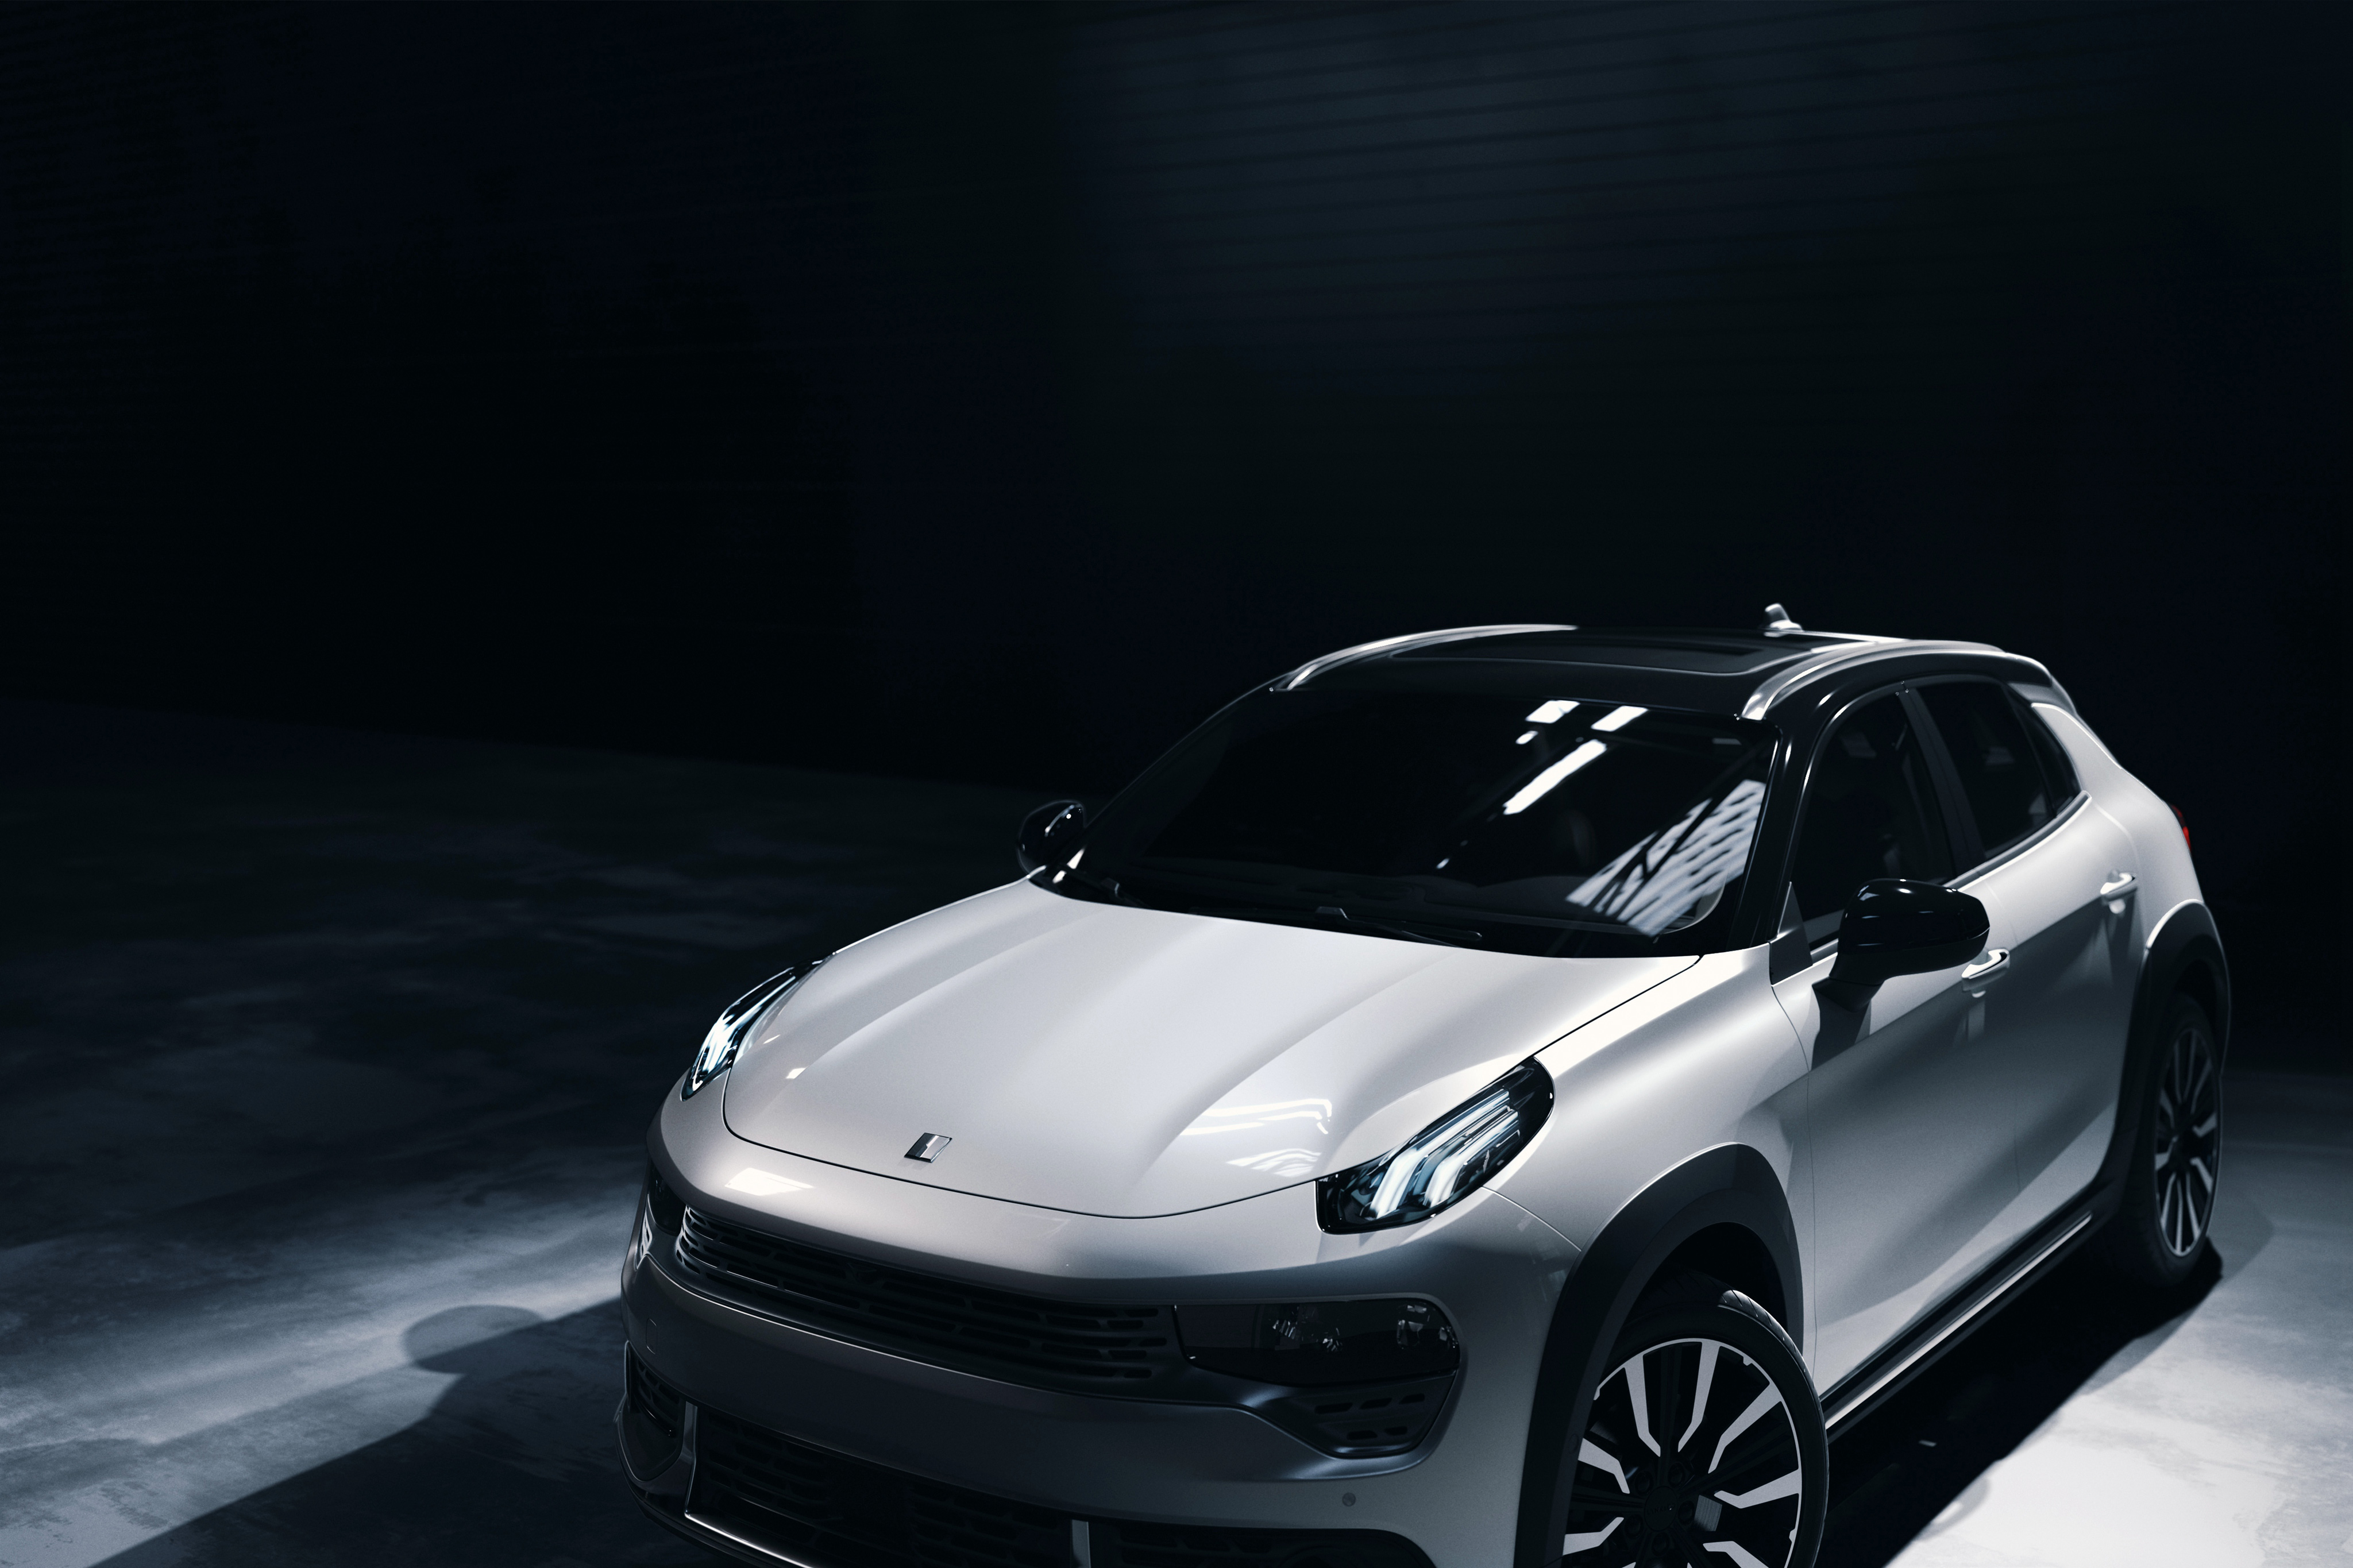 Wallpapers cars black background Lynk And Co on the desktop